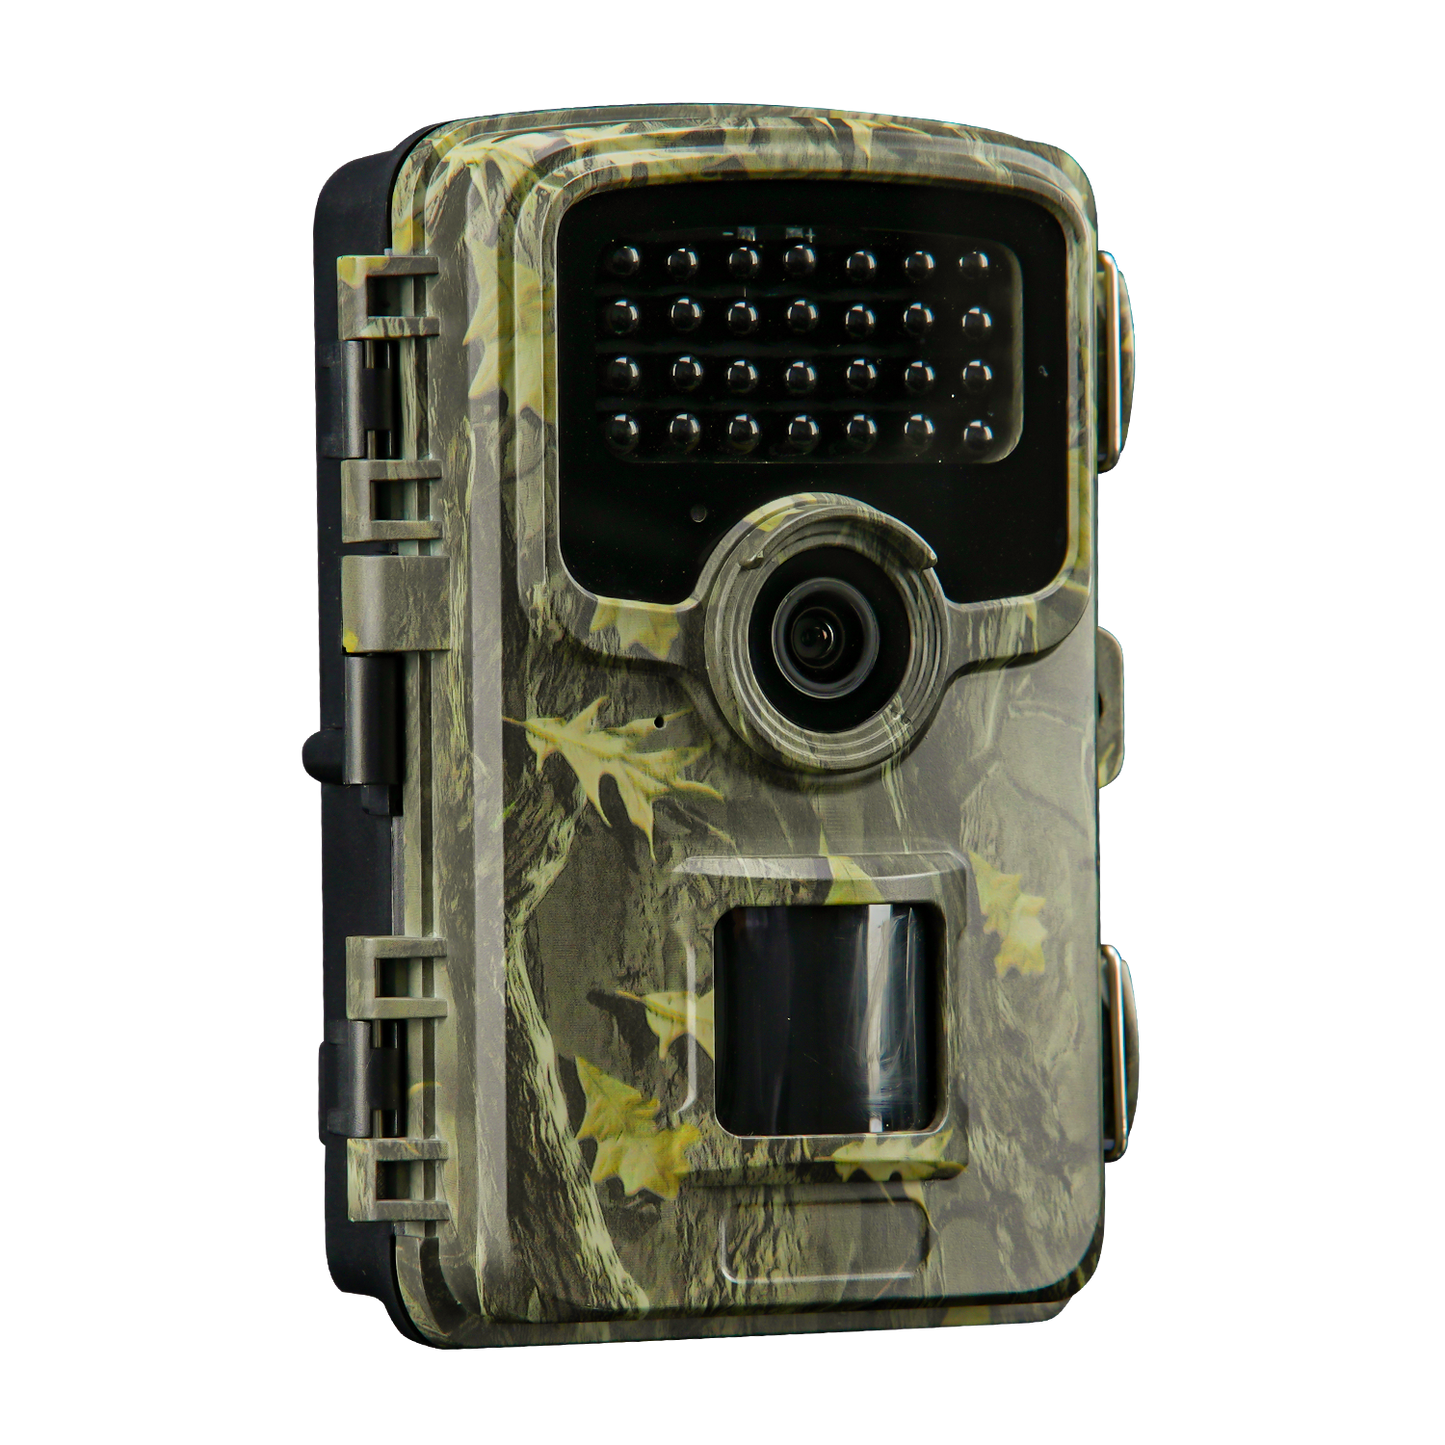 Coolife PH830 Trail Camera, 32MP 1520K High-Resolution Hunting Camera with Night Vision for Outdoor Wildlife